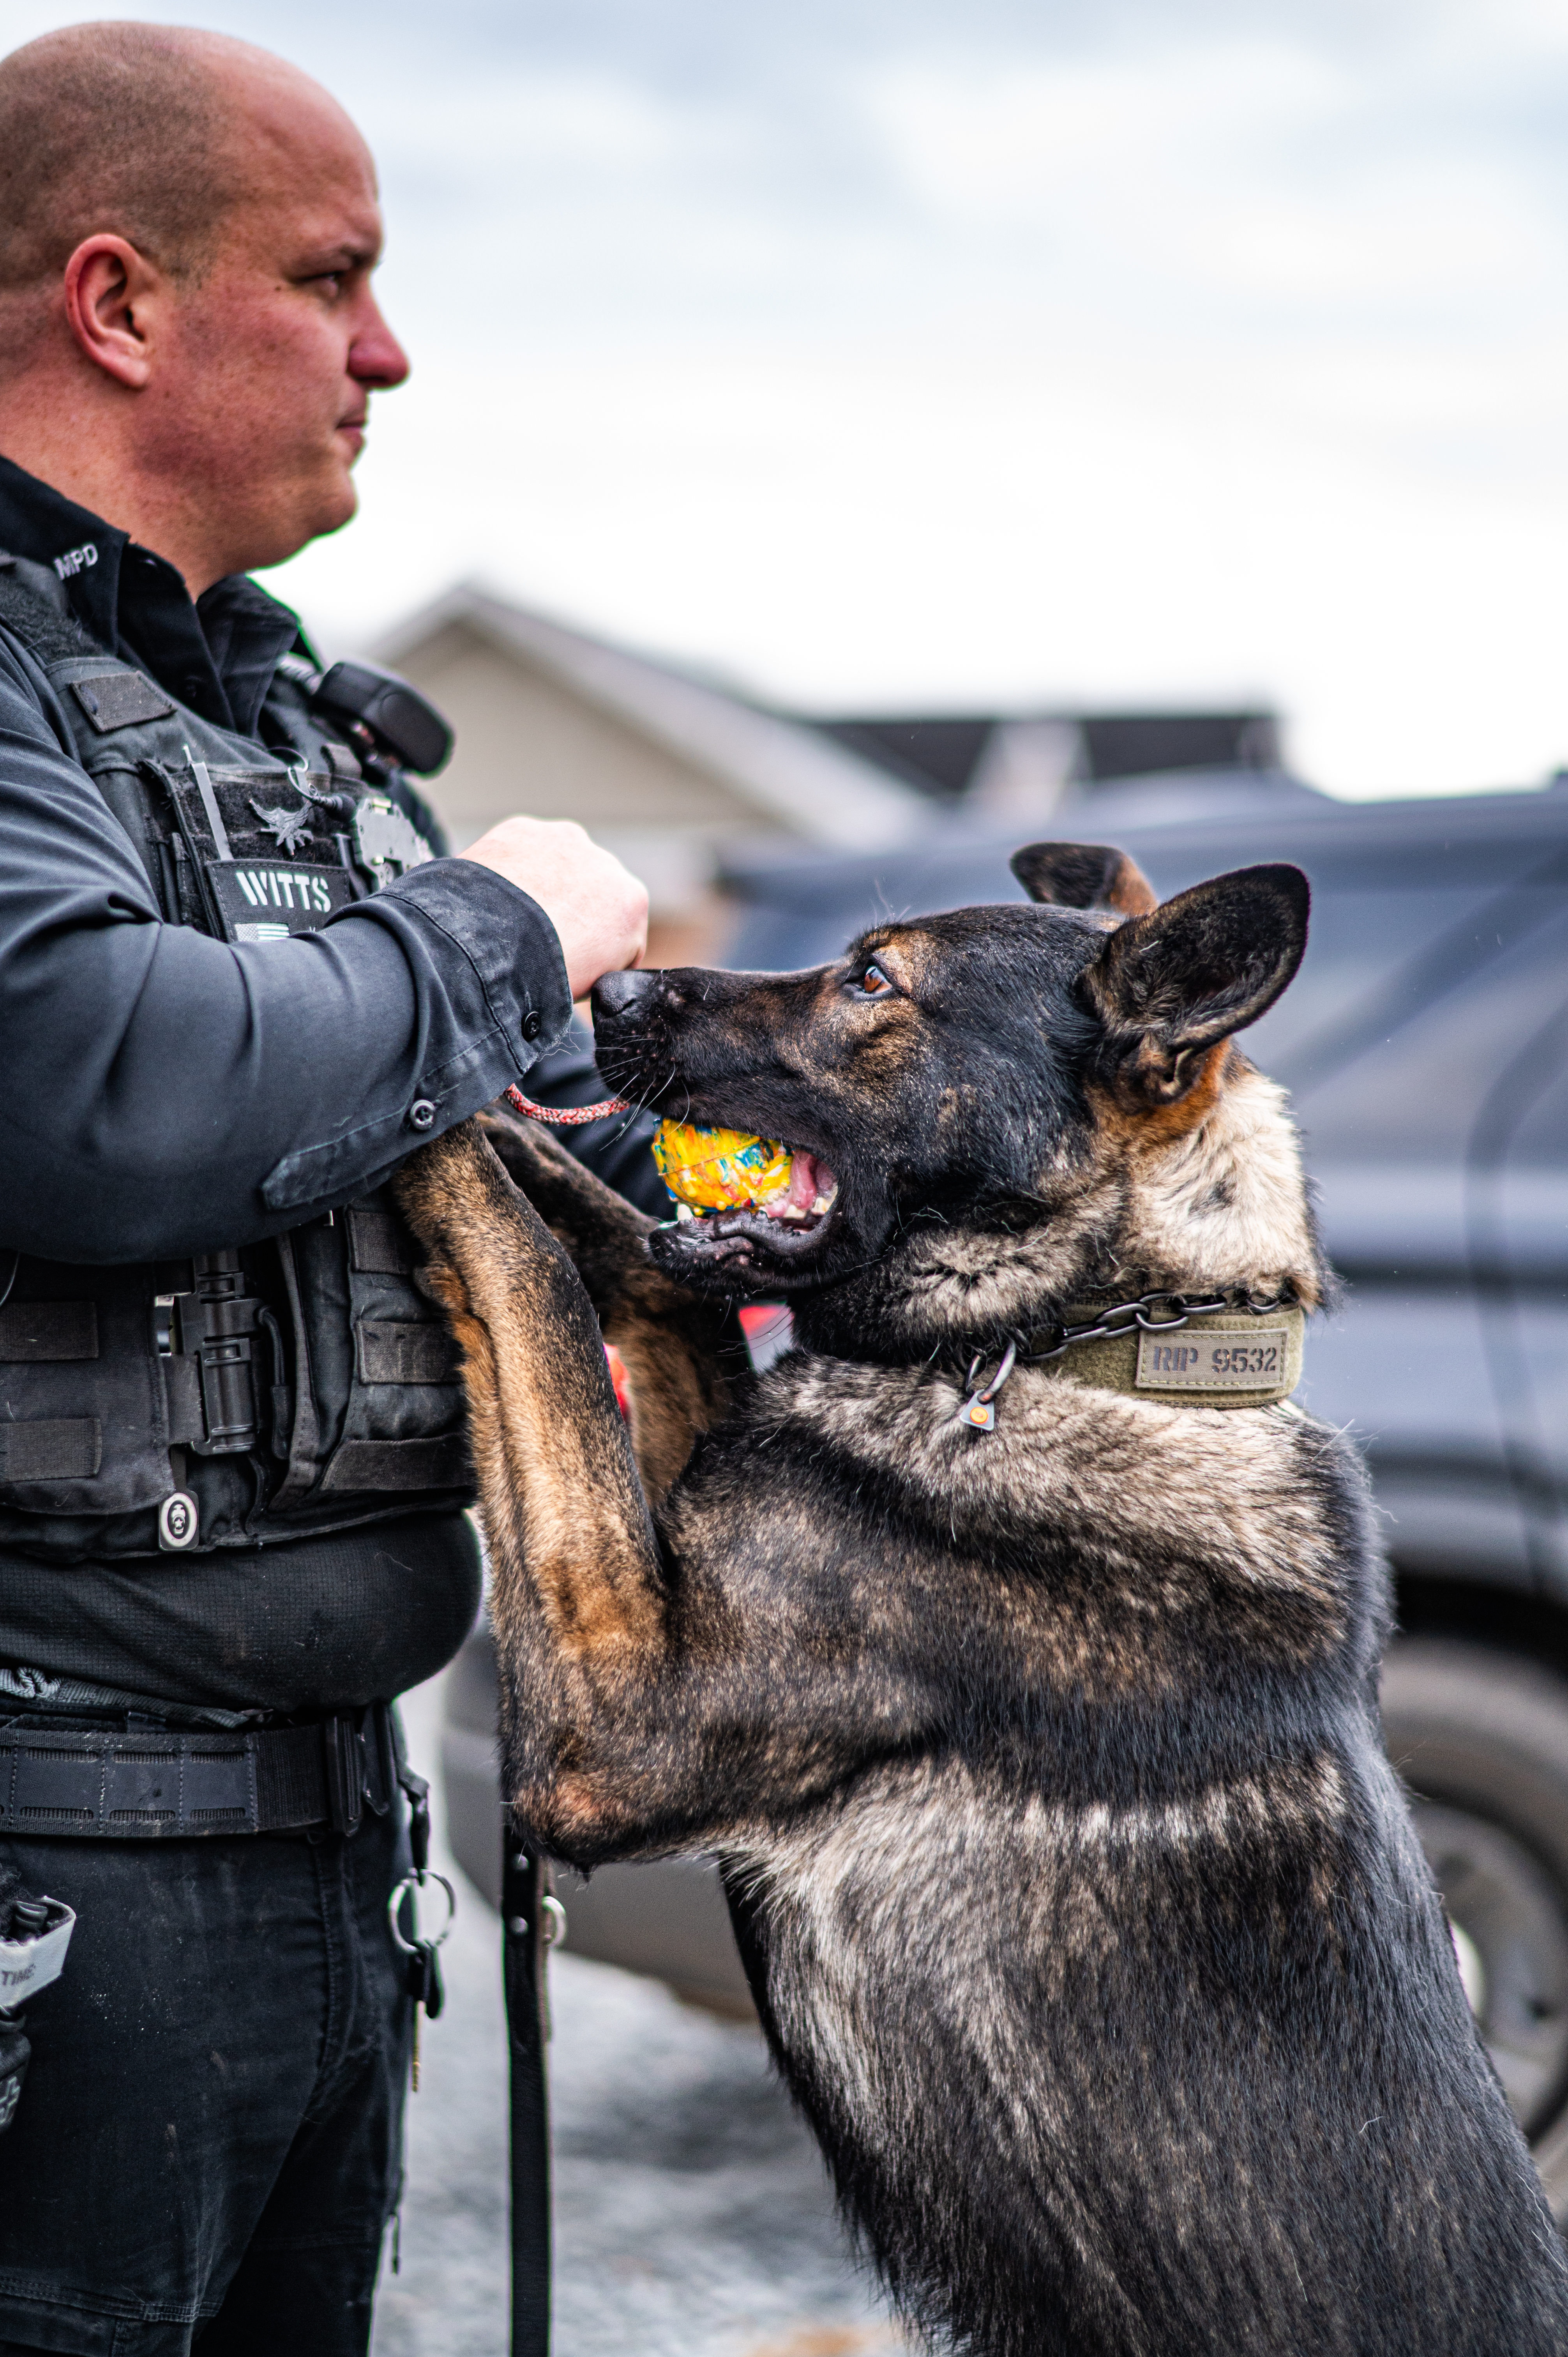 Photos: Photographer works to support retired police dogs